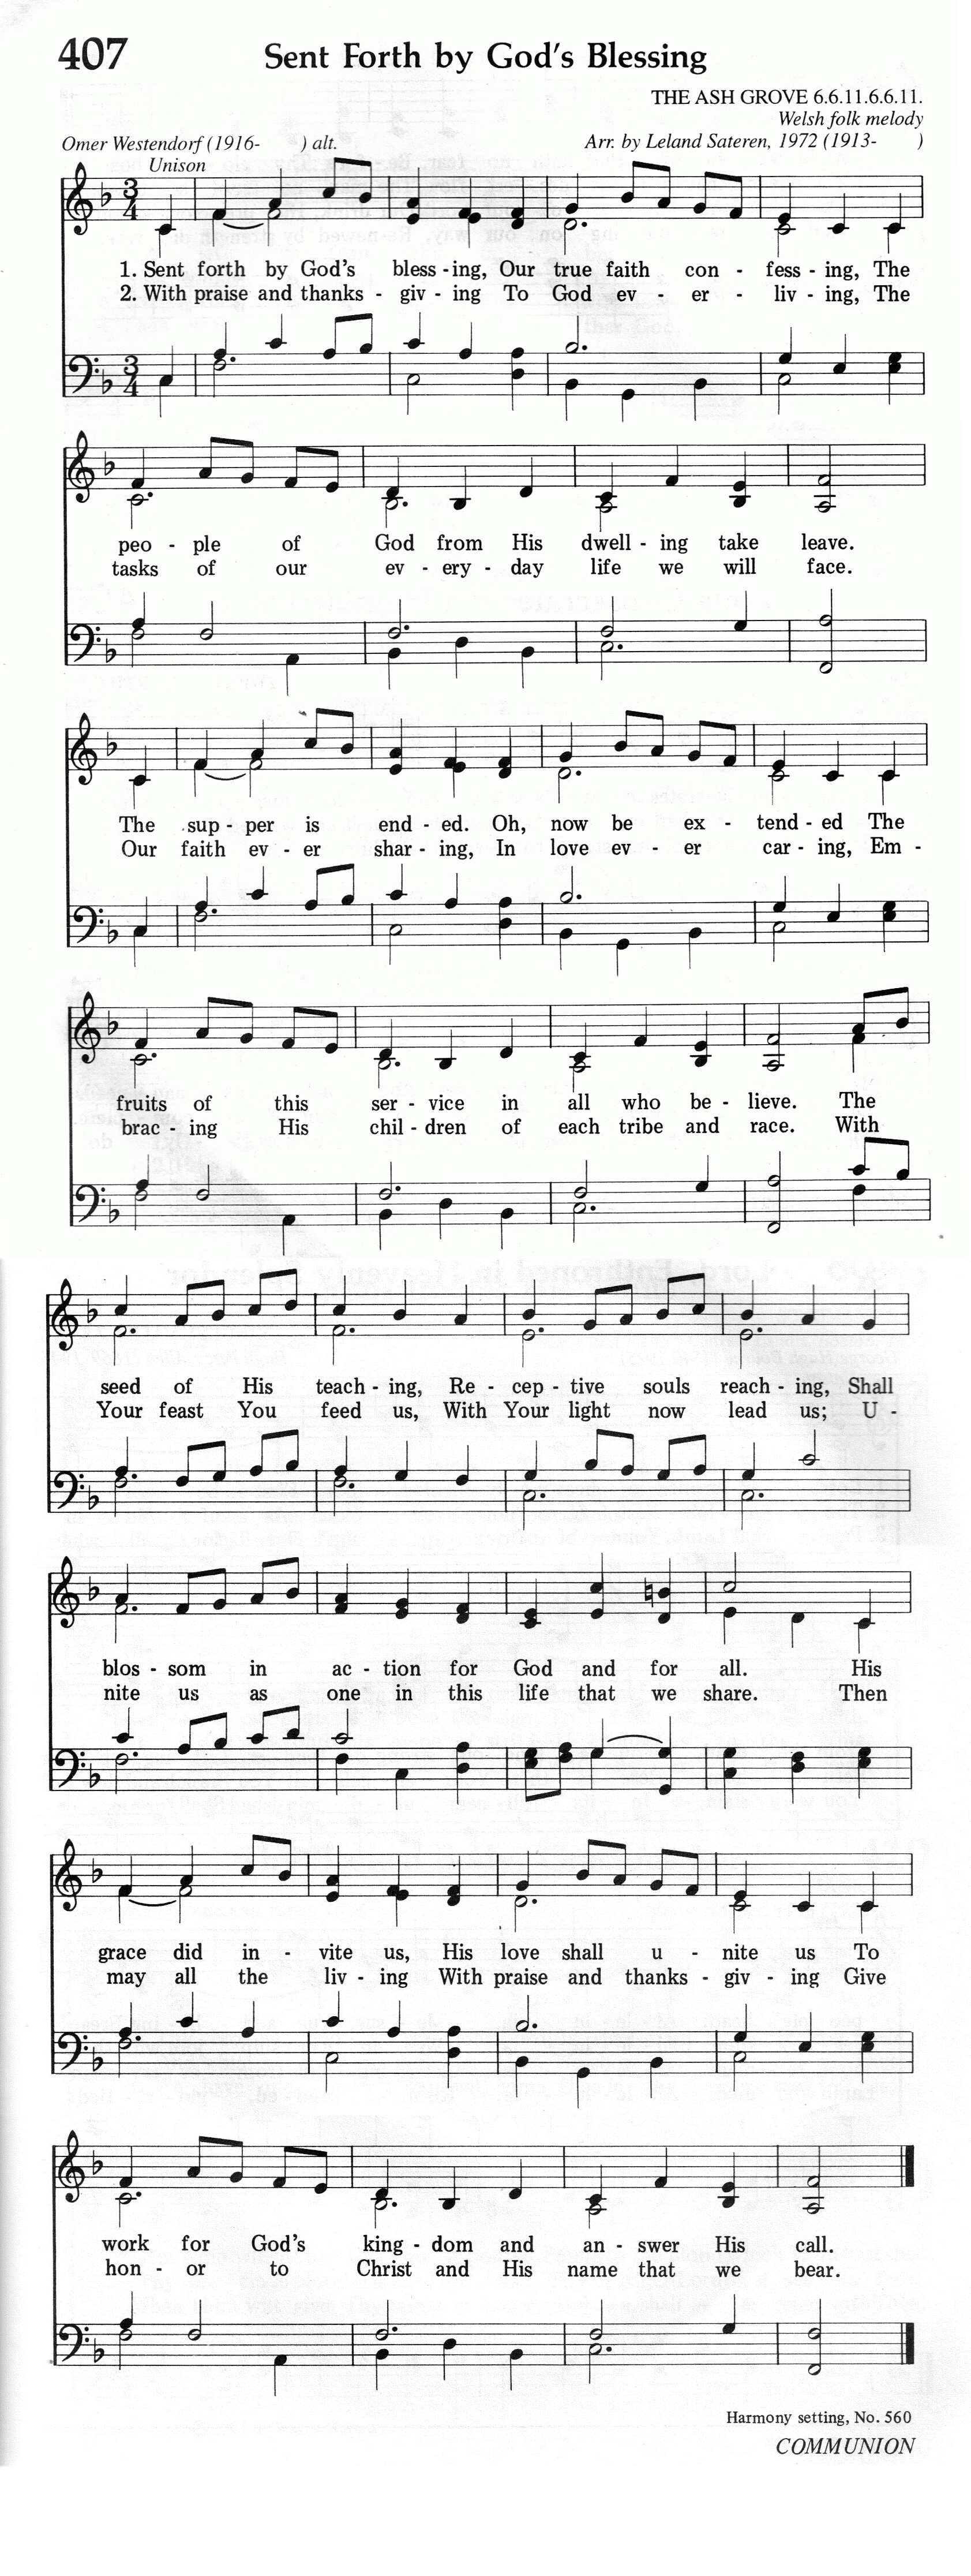 407.Sent Forth by God's Blessing-695HYMN